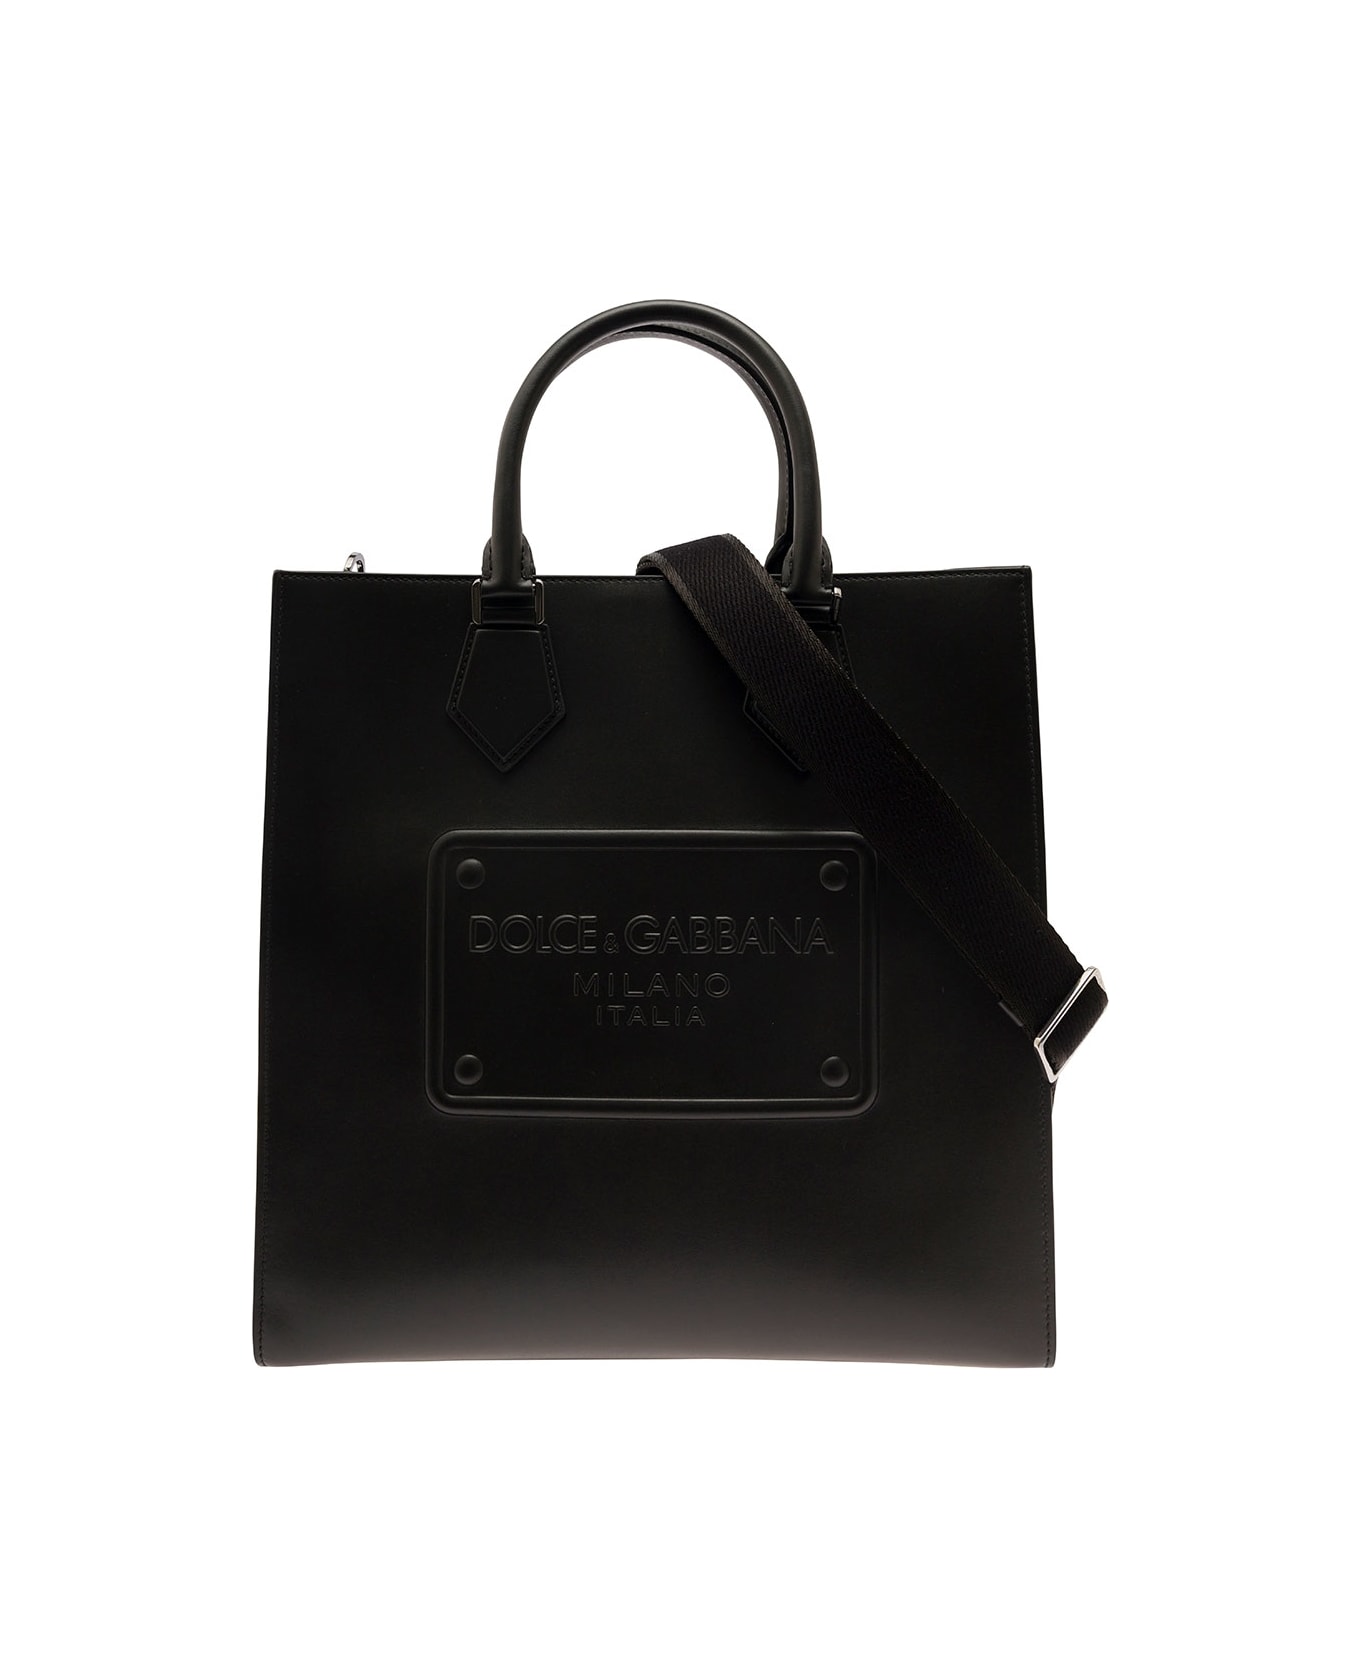 Dolce & Gabbana Black Tote Bag With Raised Tonal Logo Tag In Leather Man - Black